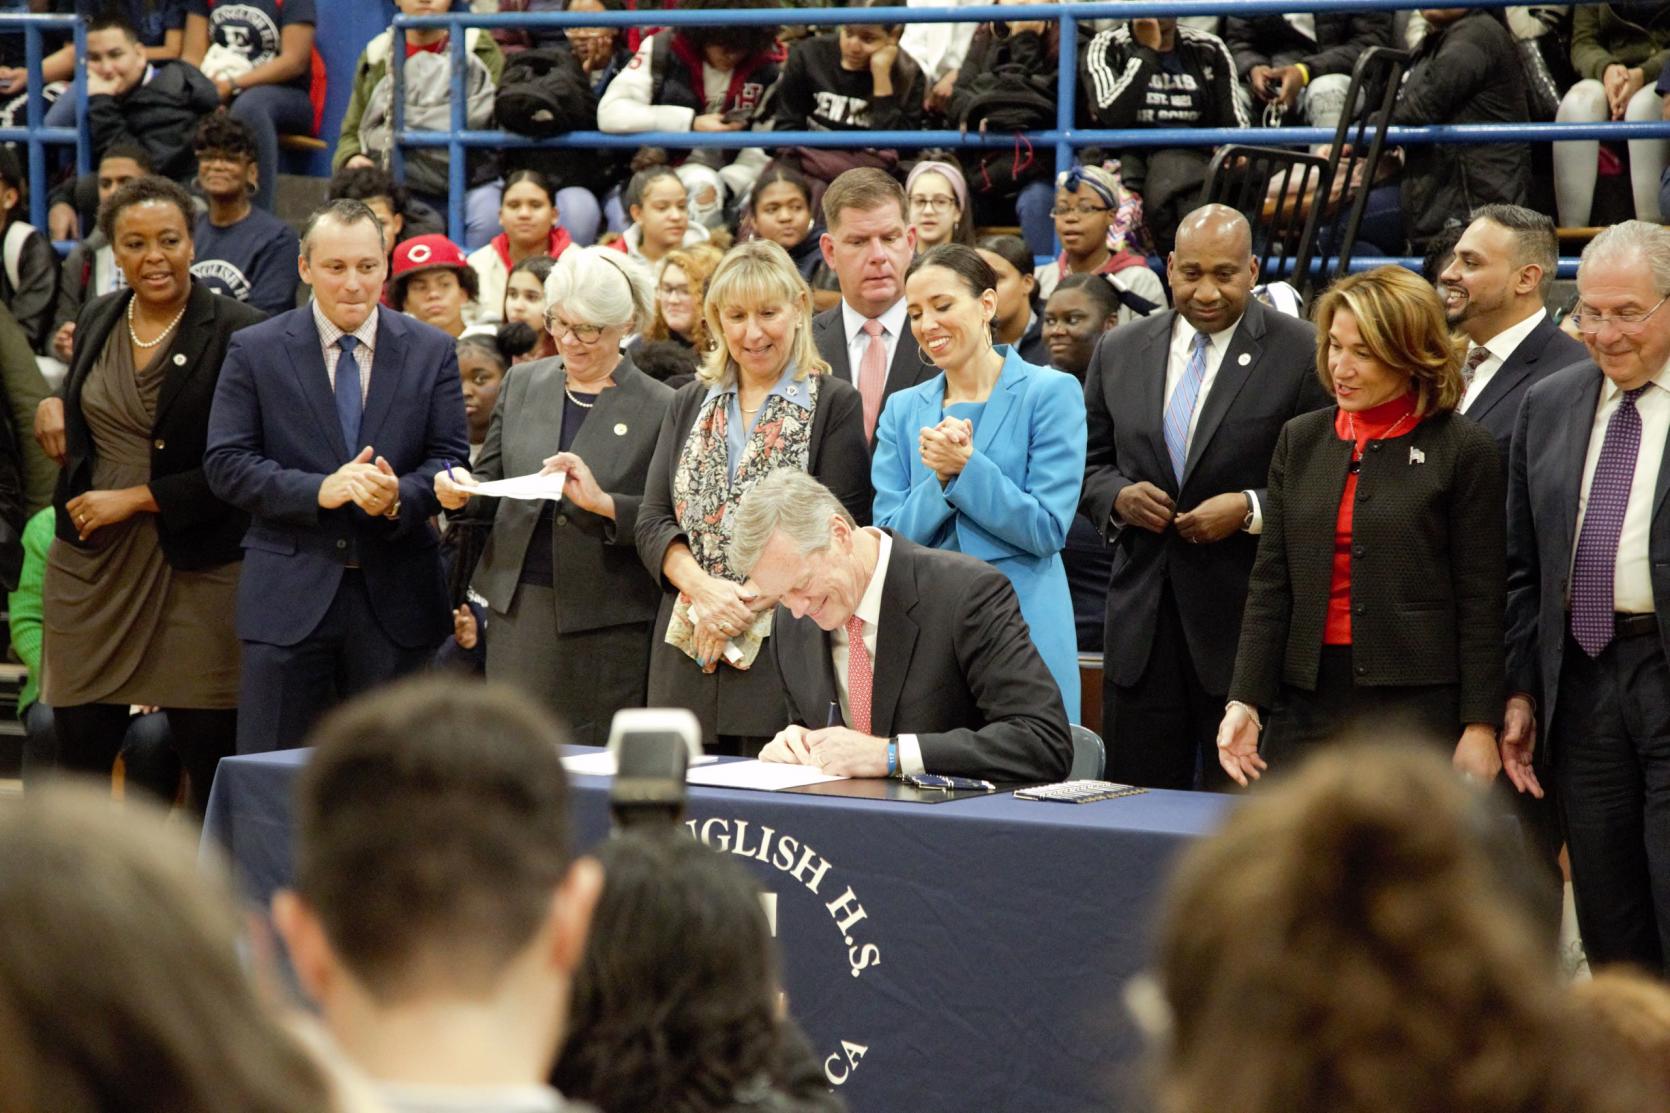 Governor Baker Signs Education Funding Bill Providing Investments in Public Schools Across the Commonwealth